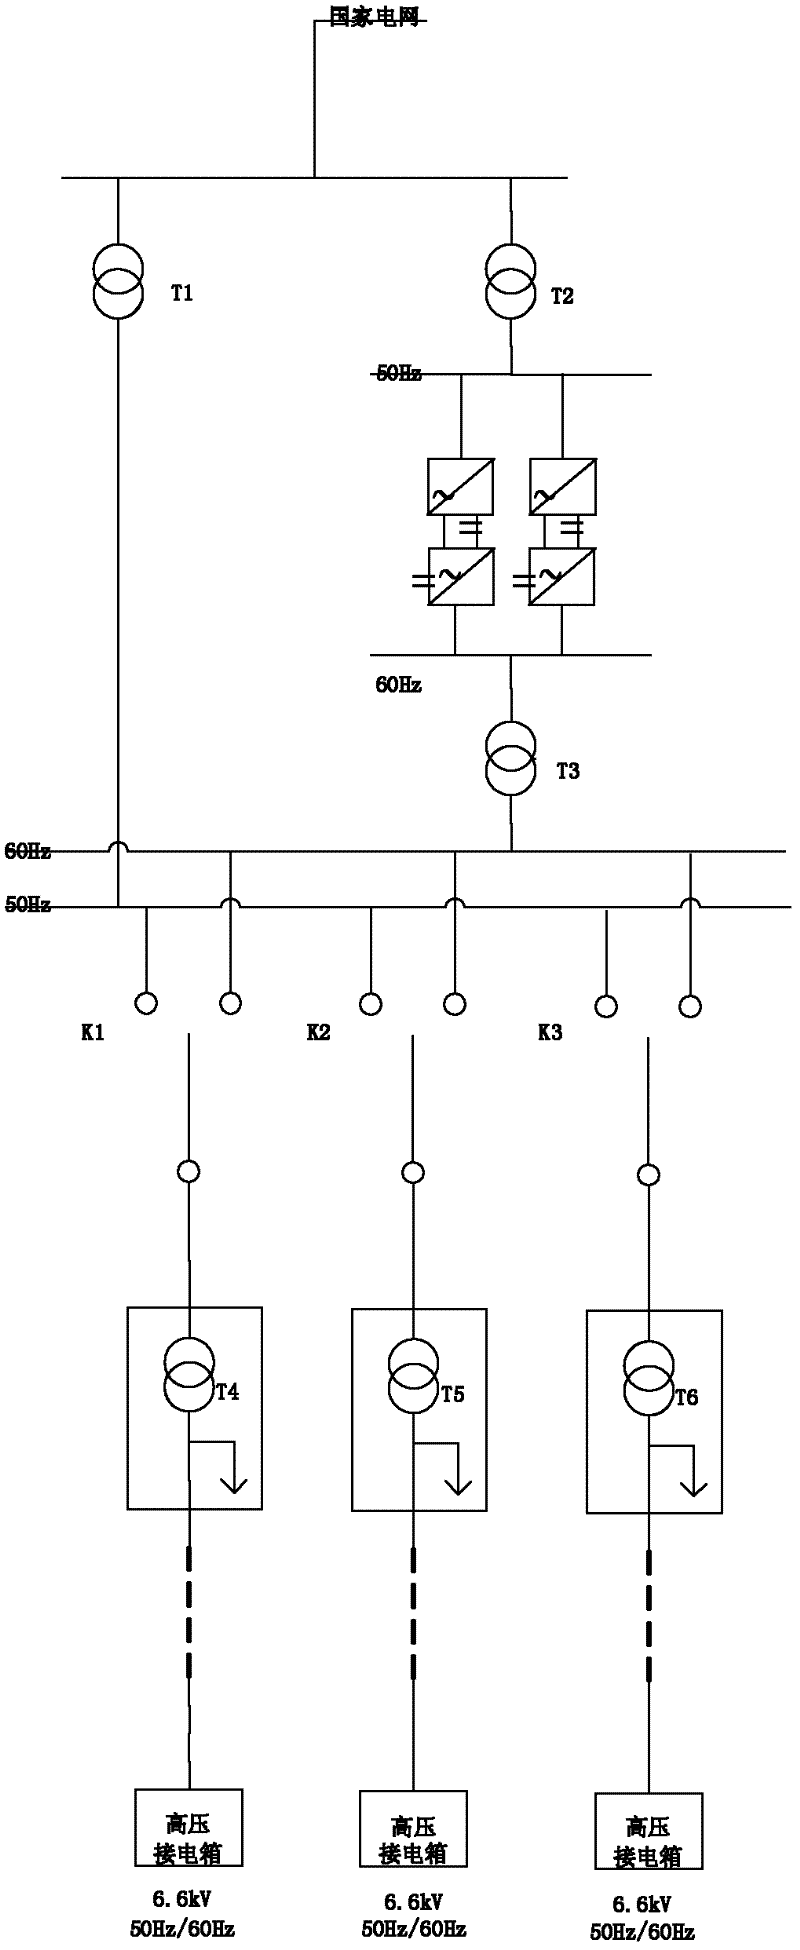 Double-frequency power supply device for ship shore power system